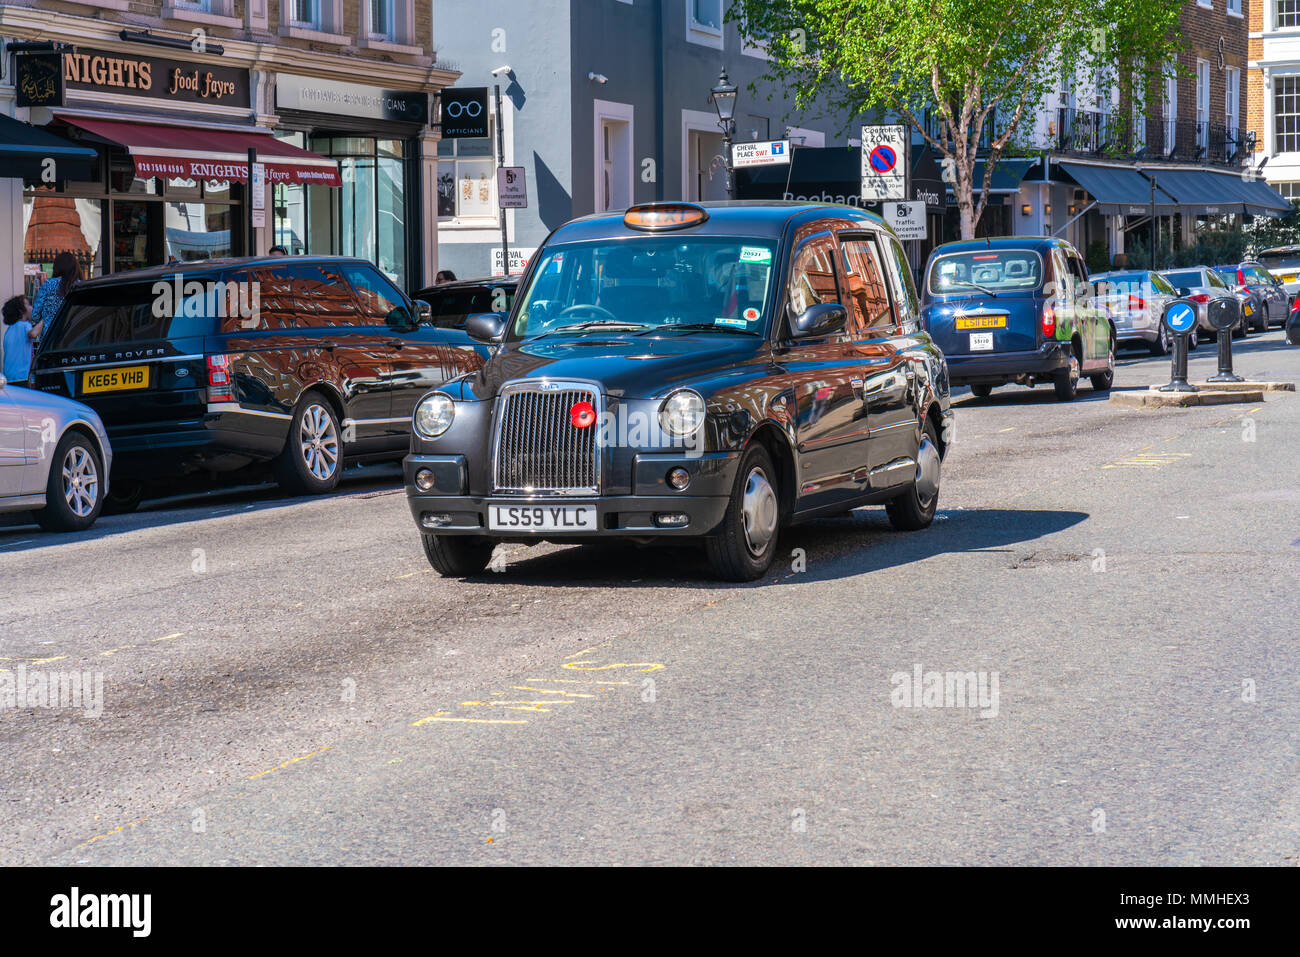 LONDON MAY 05, 2018: The iconic London black cab parked on a street in Knightsbridge, London.The traditional black cabs are specially constructed vehi Stock Photo